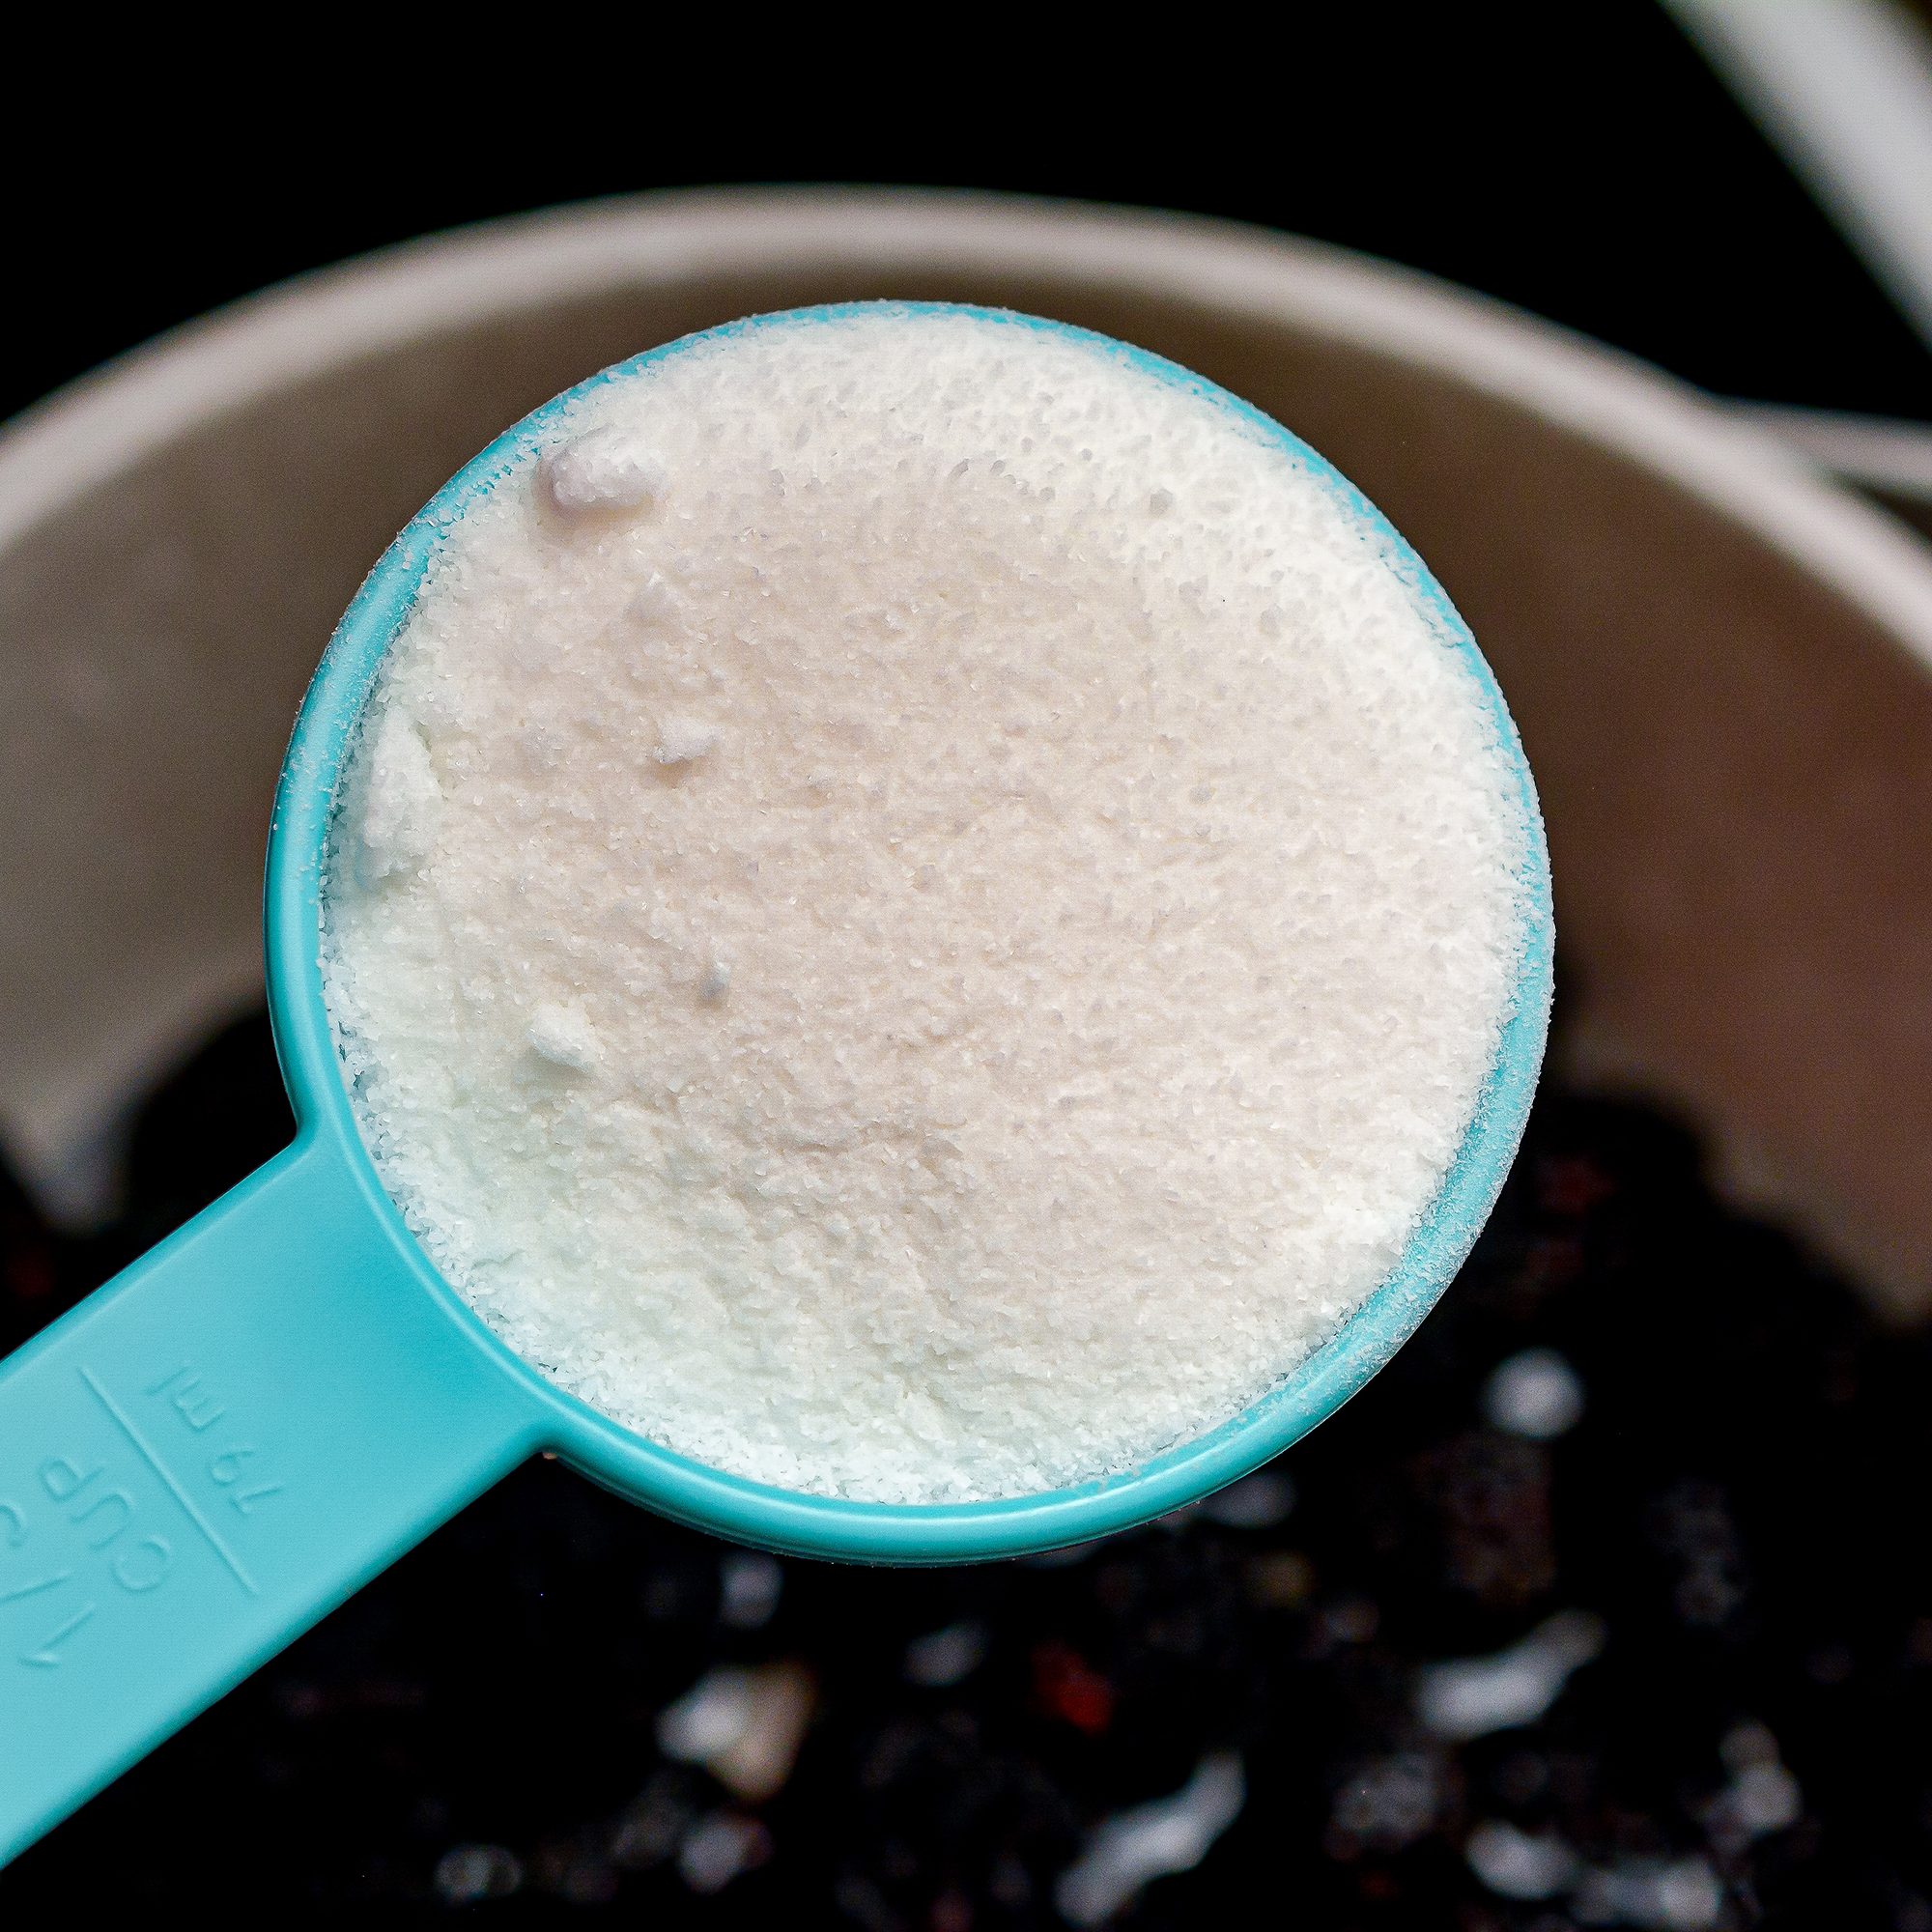 Mix together the water, berries, and ¼ cup of sugar in a saucepan on the stovetop over medium heat.